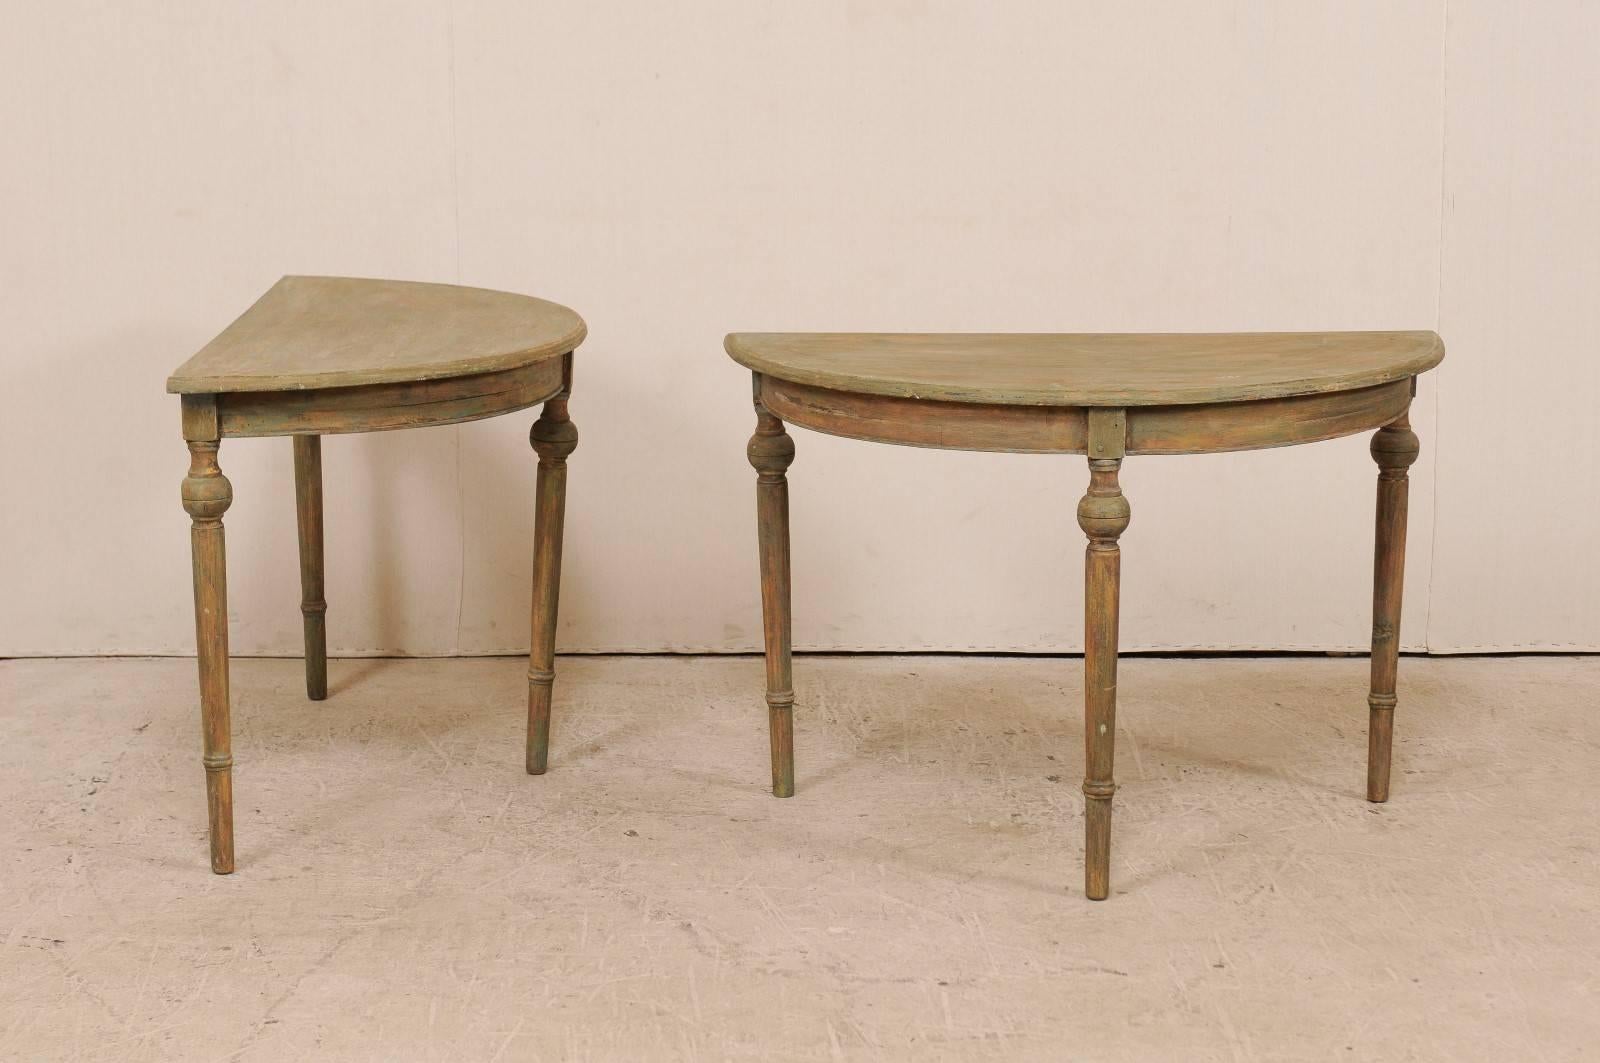 Pair of 19th Century Swedish Painted Wood Demilune Tables in Warm Sage Hues 1